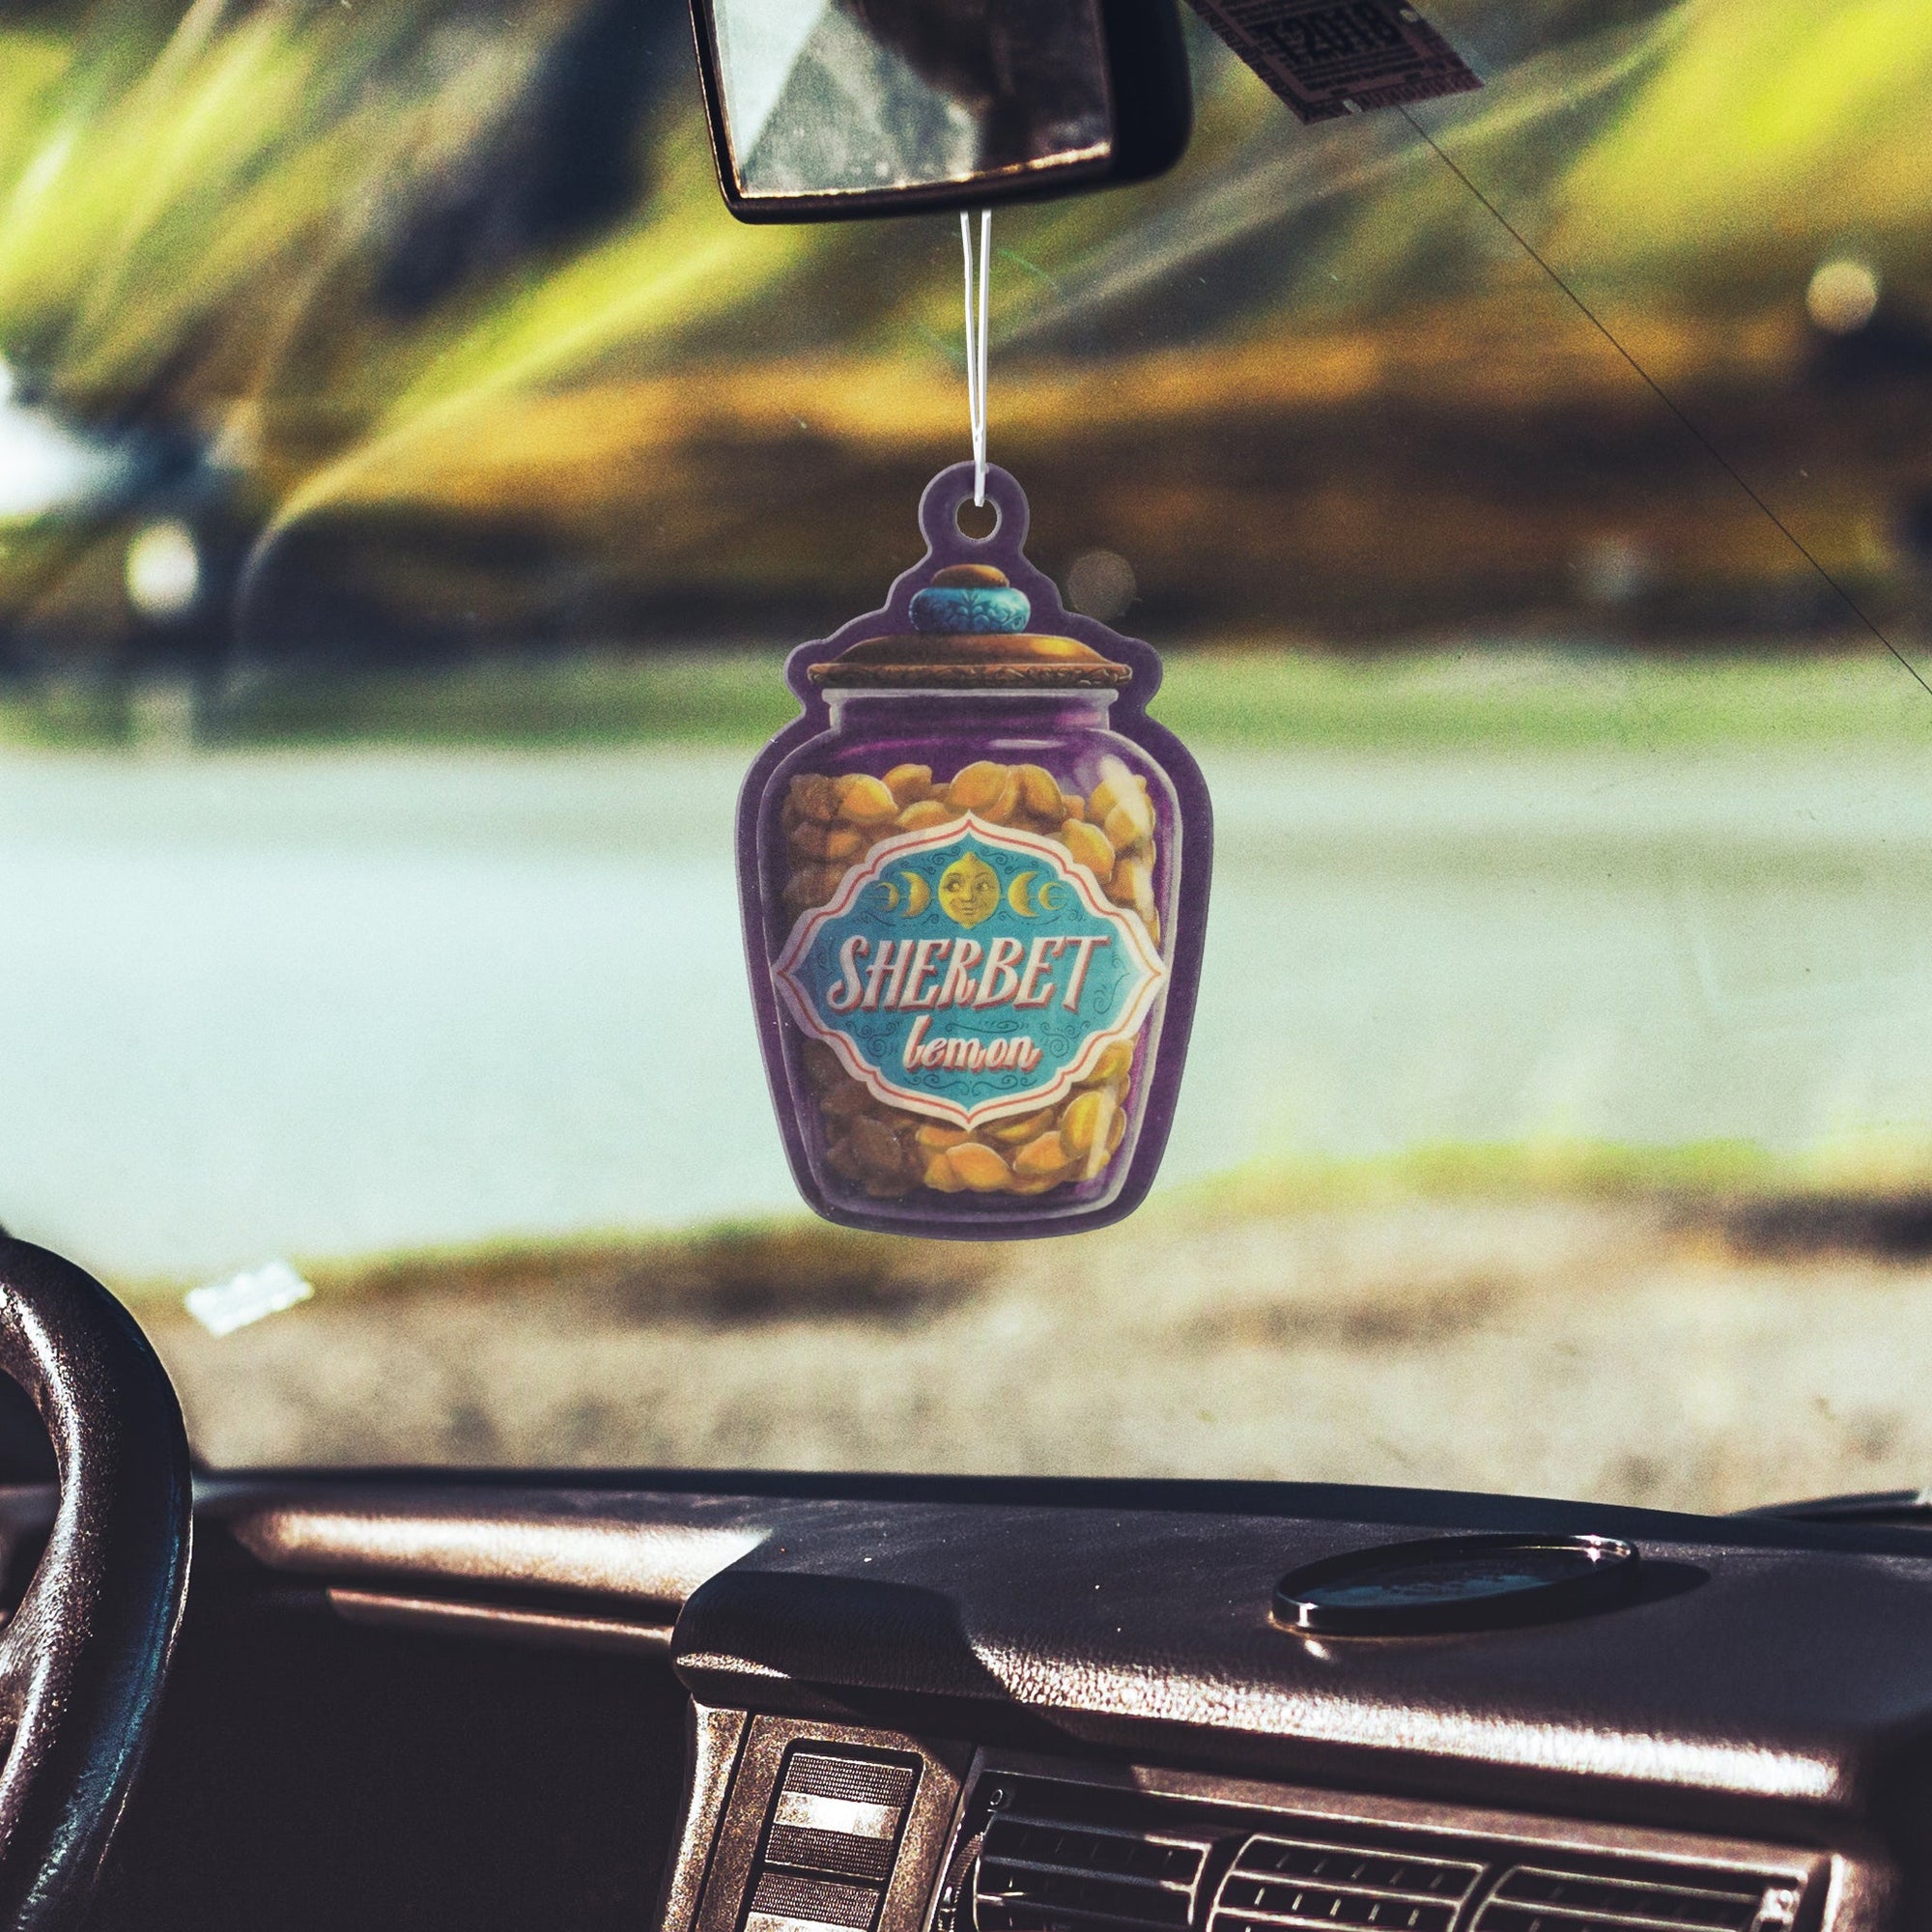 Sherbet Lemons Air Freshener is a flat purple jar containing lemon drops and hanging from a string